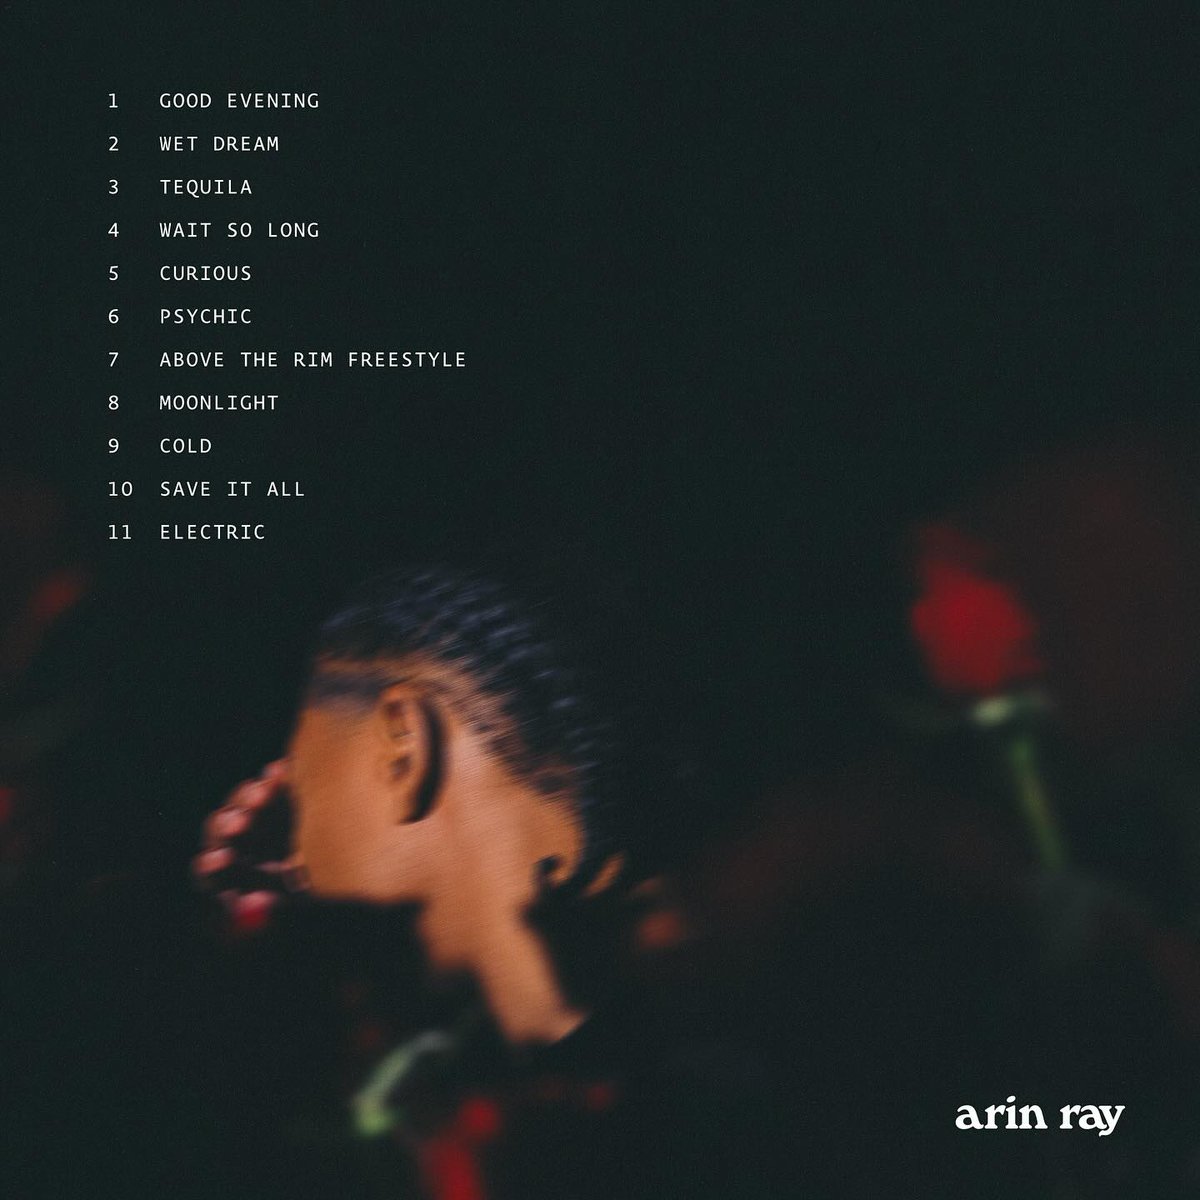 “Phases III” EP by @ArinRayCamp mastered here here on @EngineEars! Mixed by @YaBoyNOIS @prizzie__ Mastered by @niccdep Assistant Mastering Engineer @MetePowers #arinray #EngineEars #mastering #milliondollarsnare #SendItToDep